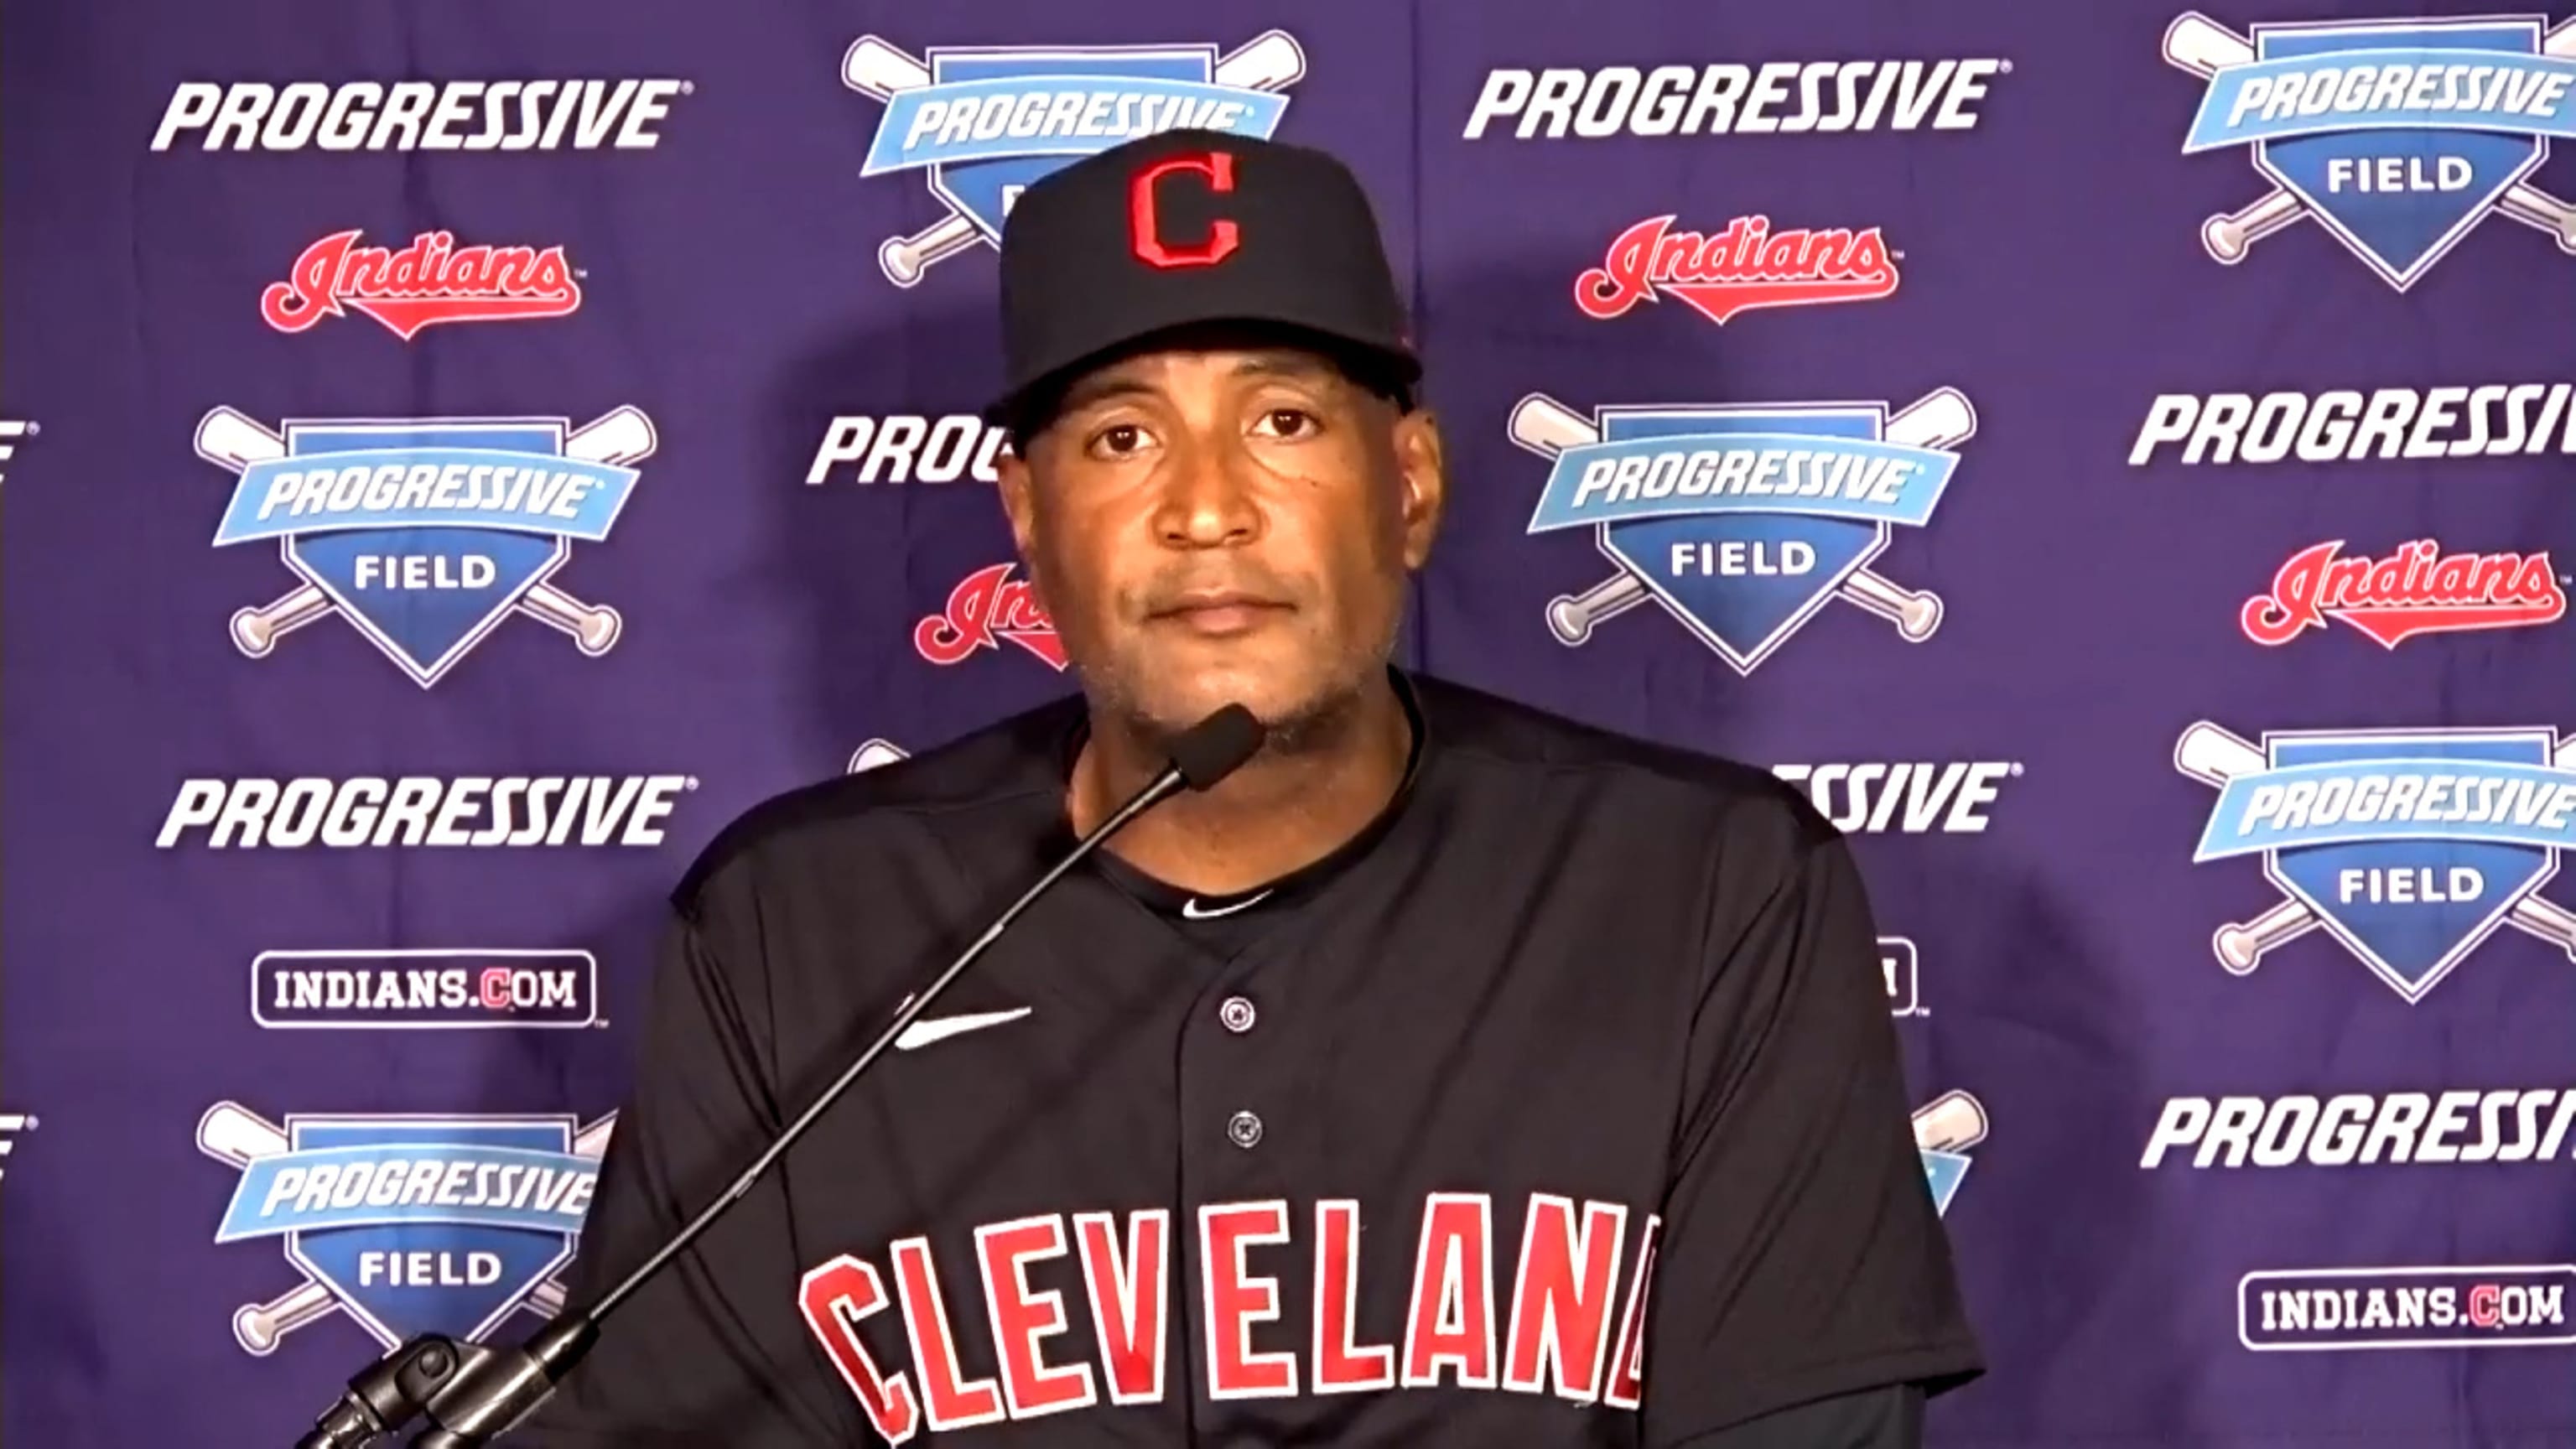 Cleveland Indians' Sandy Alomar learning the hard facts about